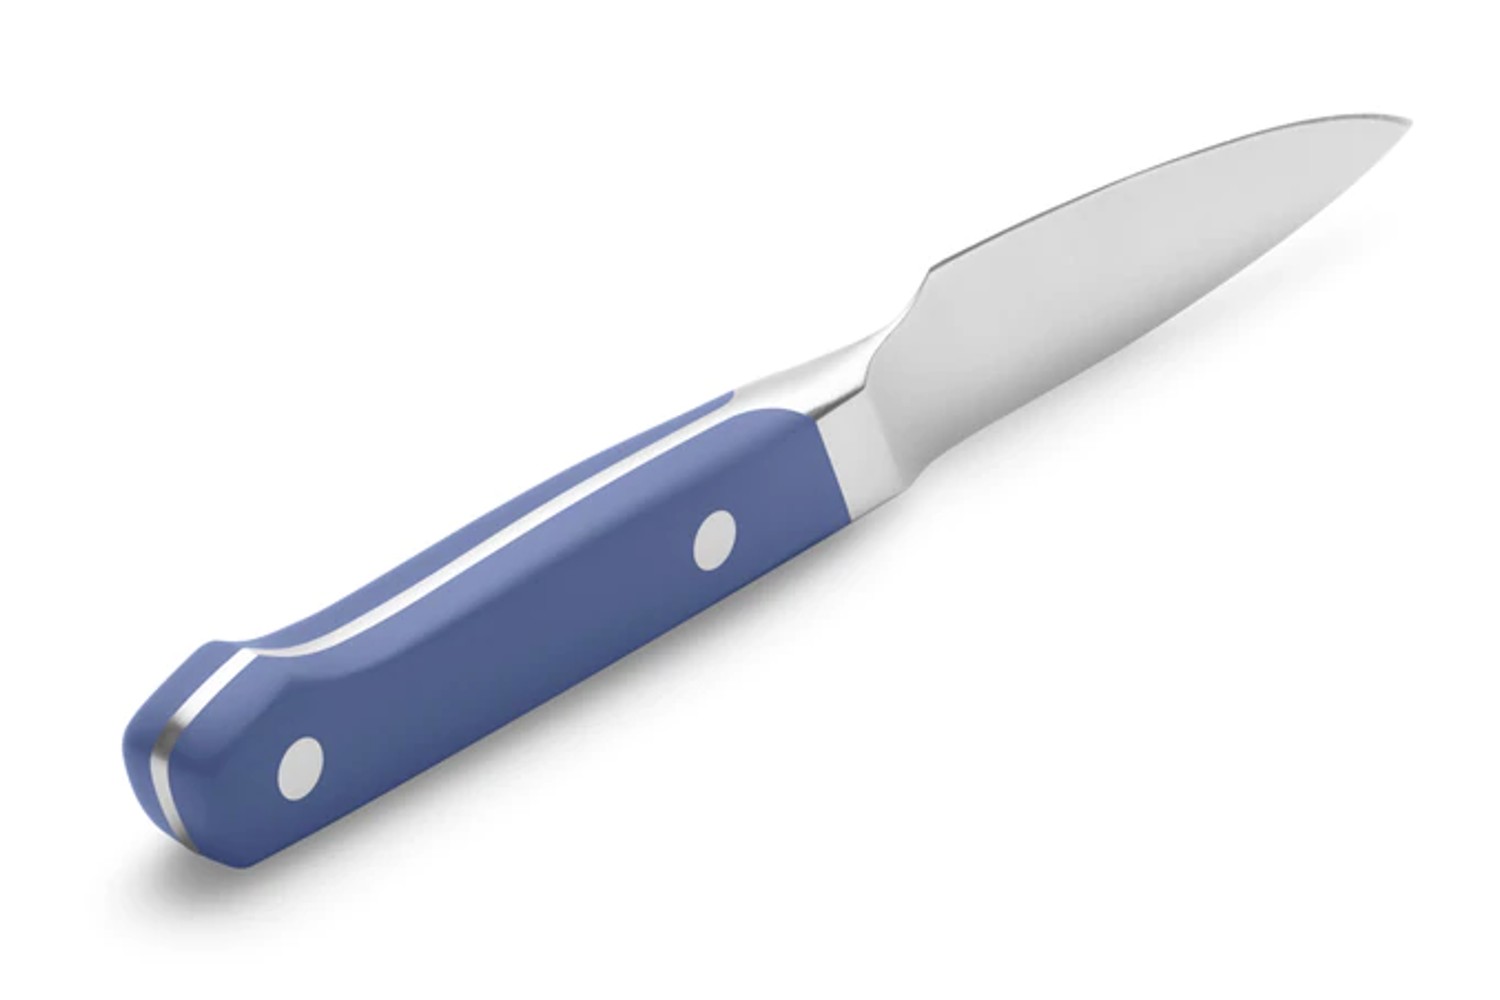 misen paring knife with a blue handle.